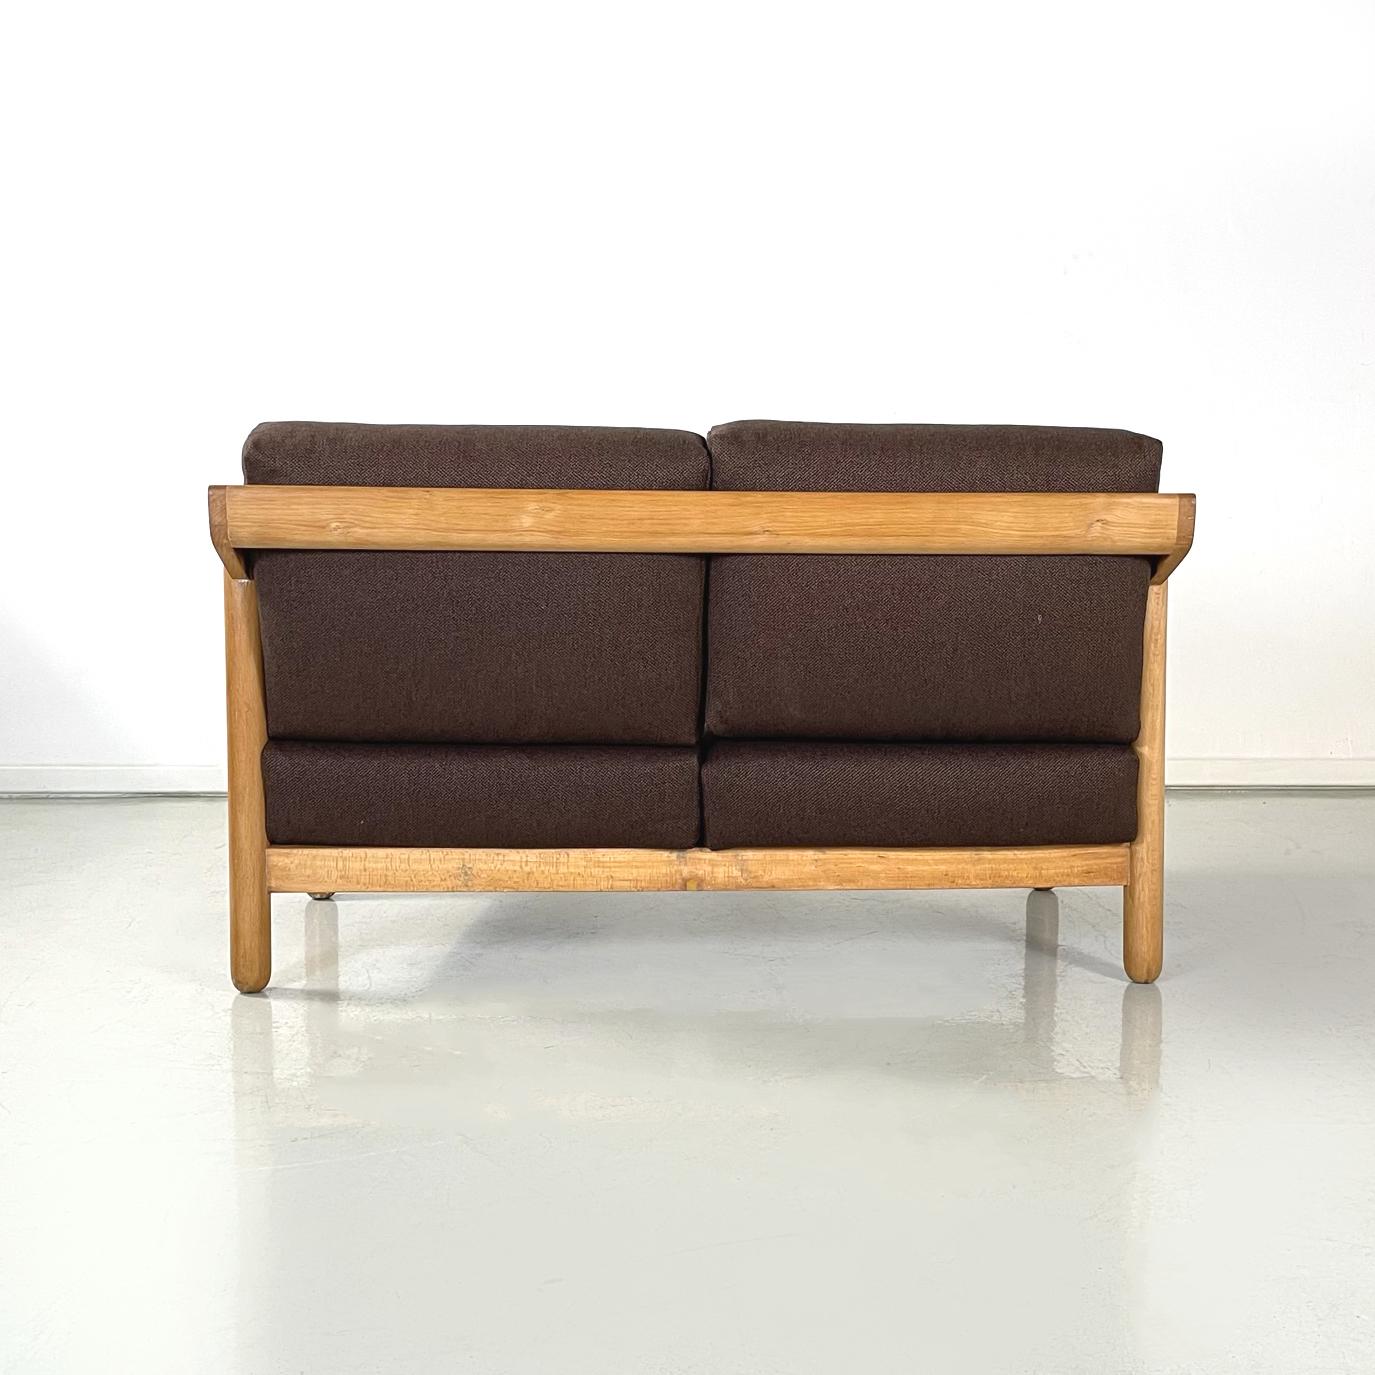 Mid-20th Century Italian Midcentury Brown Armchairs Sofa Loden by Magistretti for Cassina 1960s